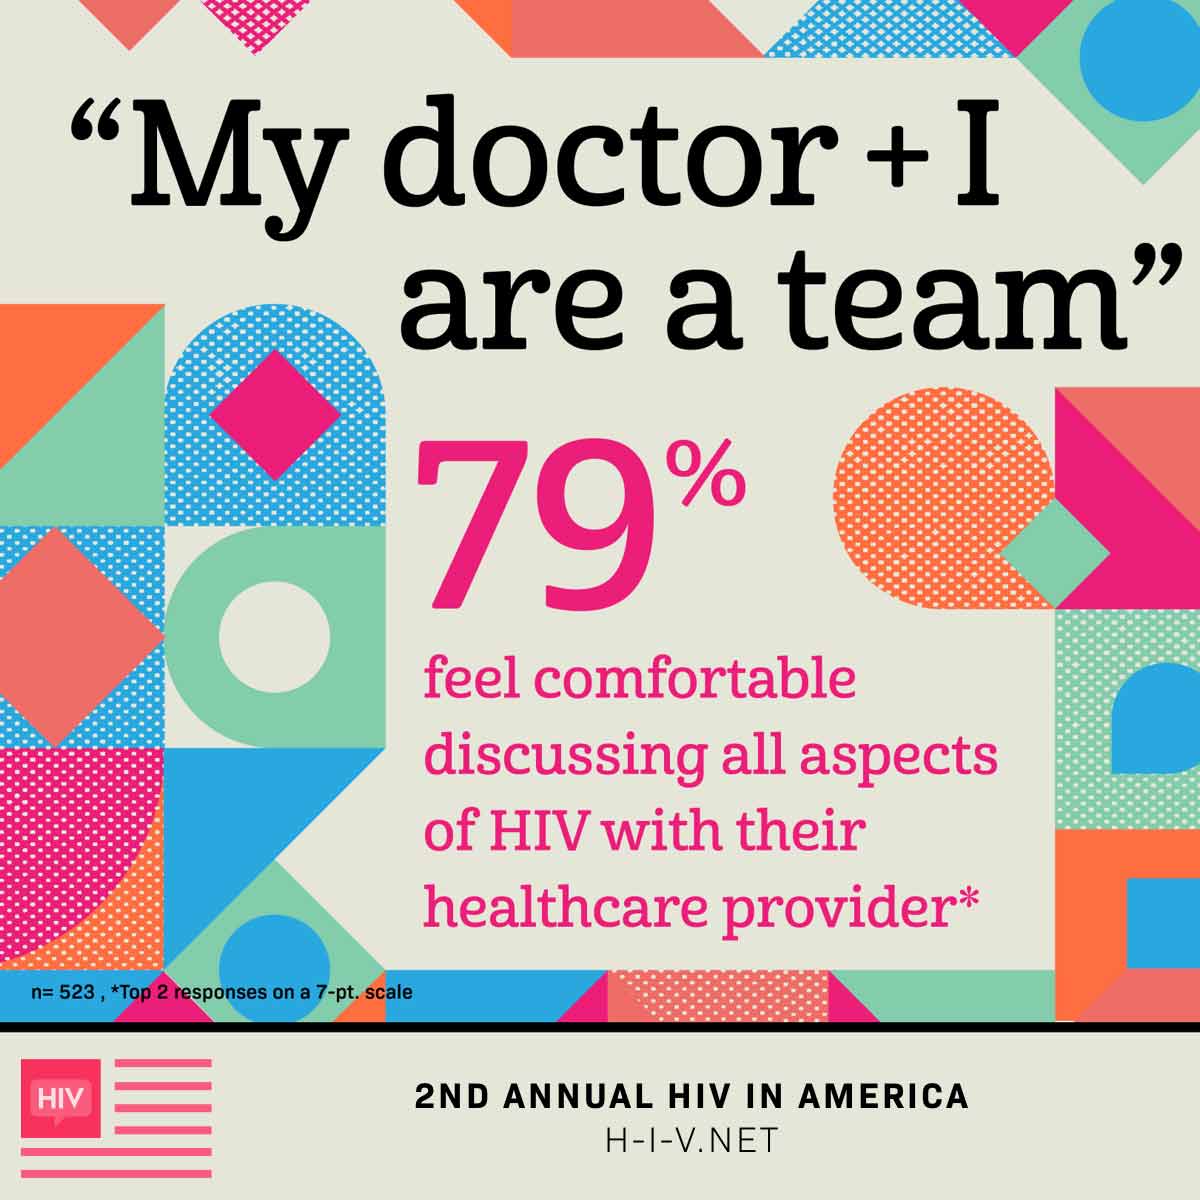 79 percent of participants feel comfortable discussing all aspects of HIV with their healthcare provider.